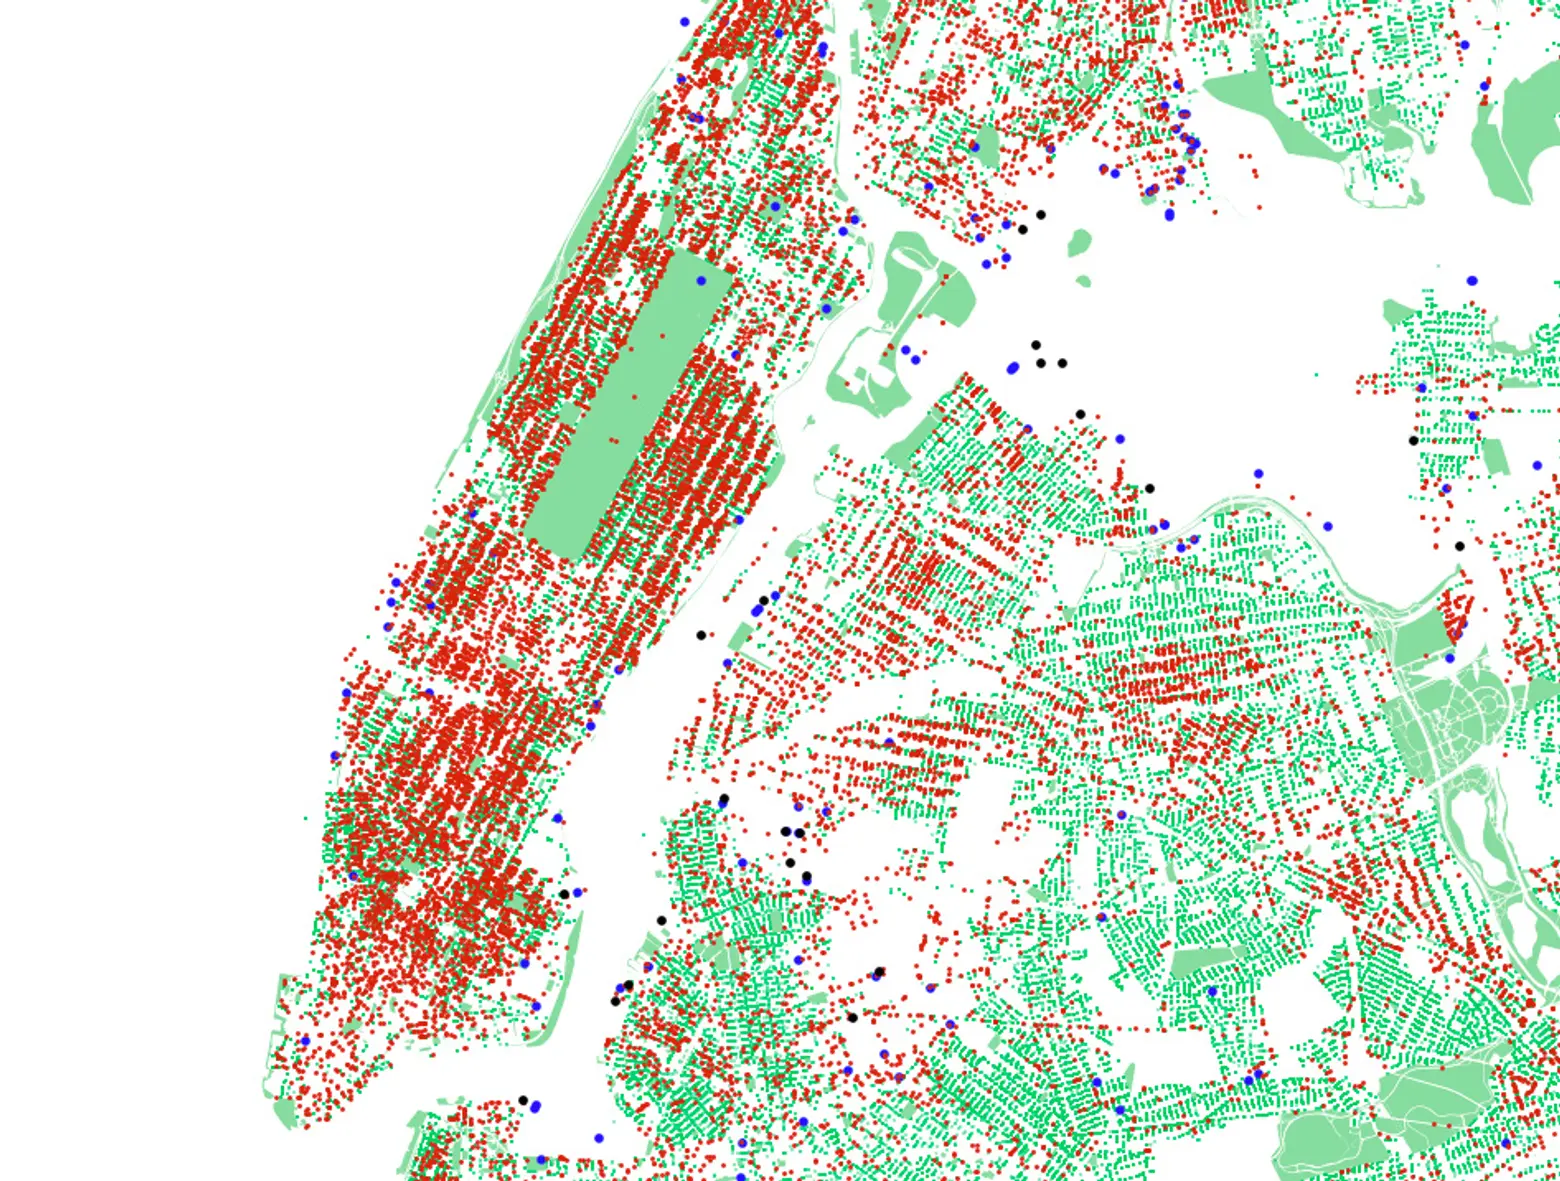 ‘NYC Anthropocene’ Maps Visualize the City’s Oil and Chemical Spills Since 2010